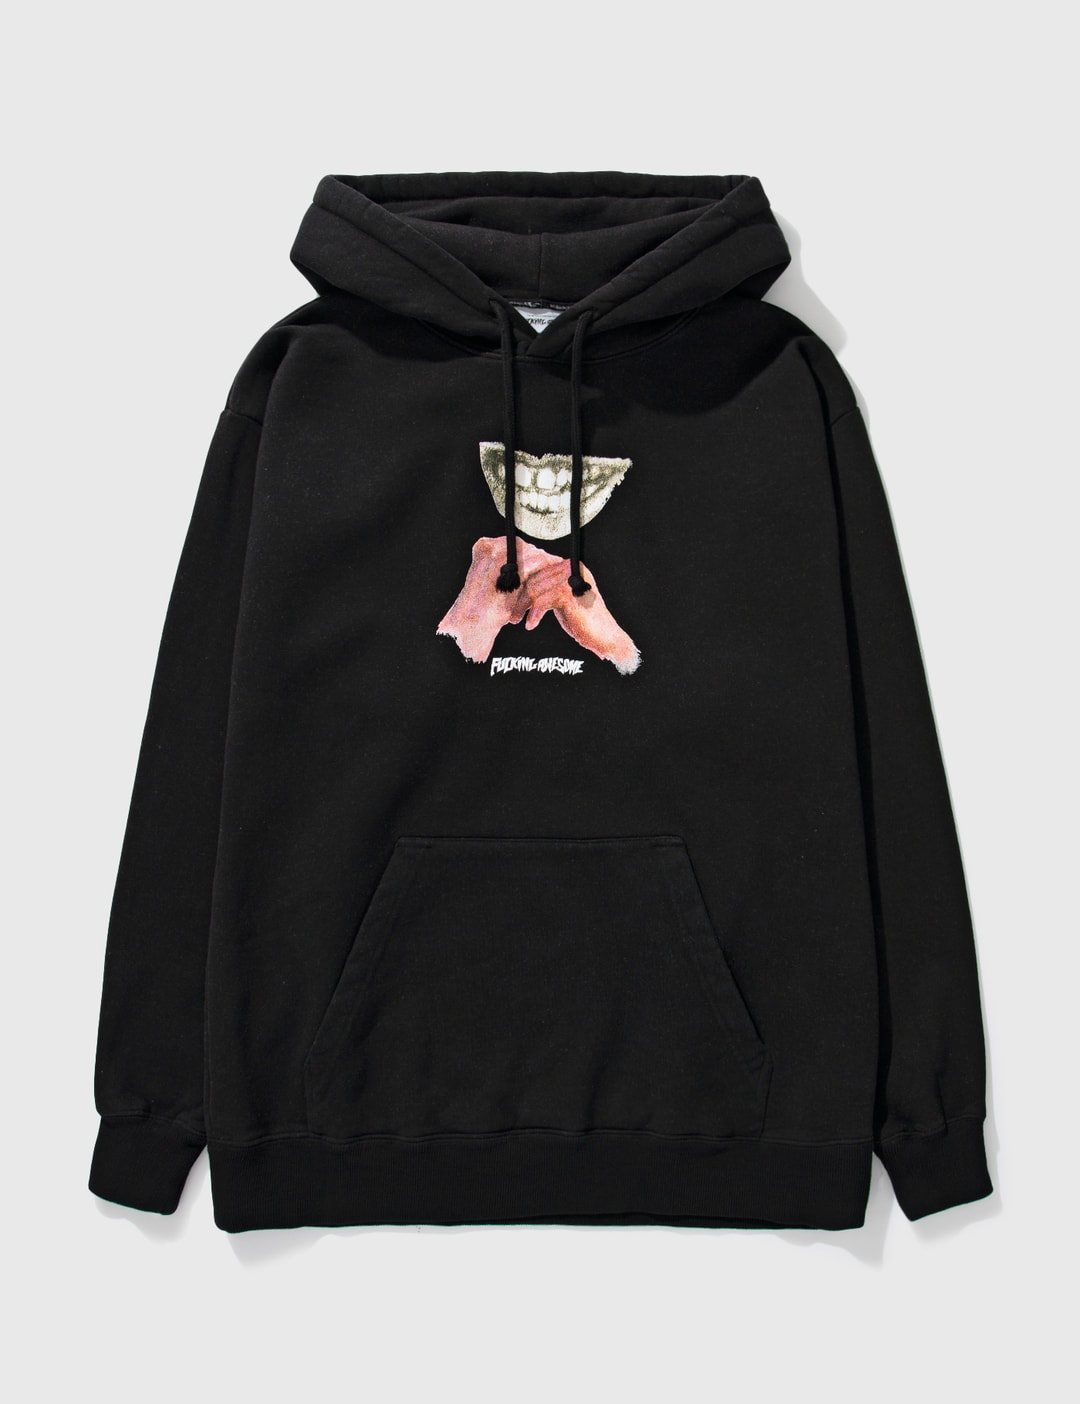 Mooie jurk Melancholie Billy Fucking Awesome - Hands Teeth Hoodie | HBX - Globally Curated Fashion and  Lifestyle by Hypebeast